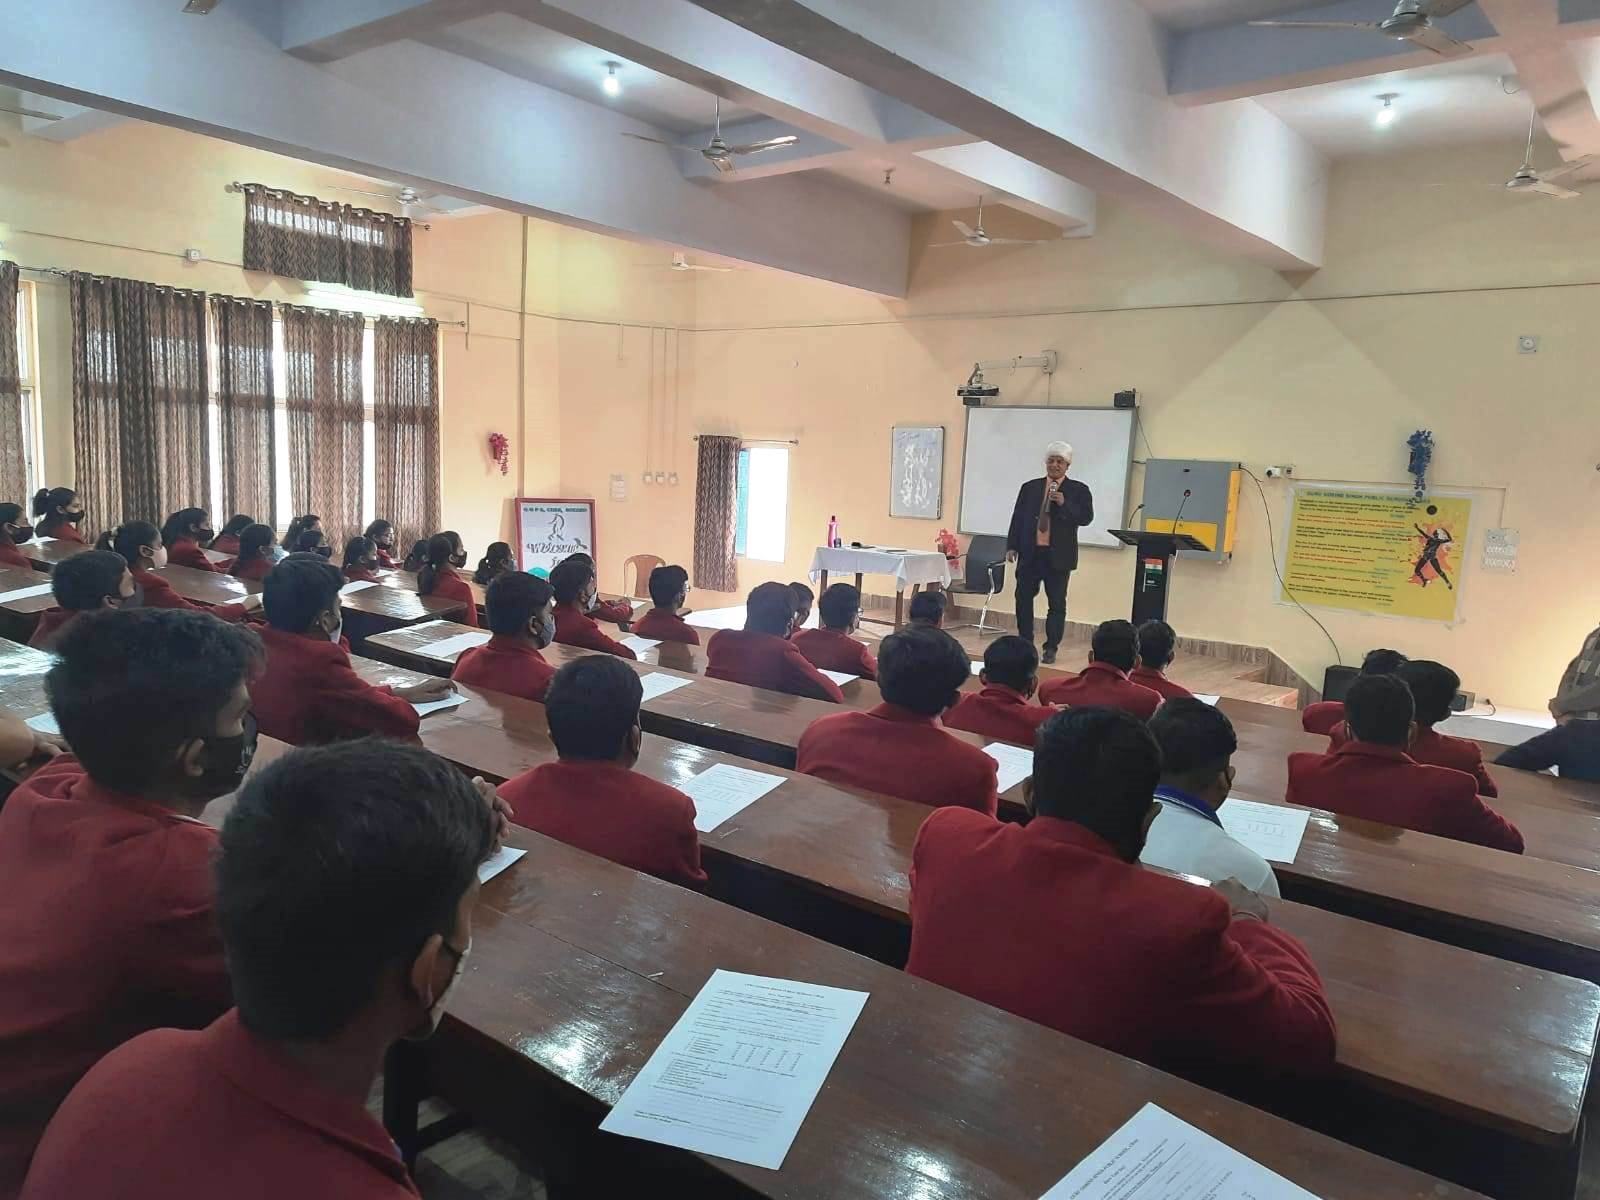 Goal setting cum career counseling session with students of class X.